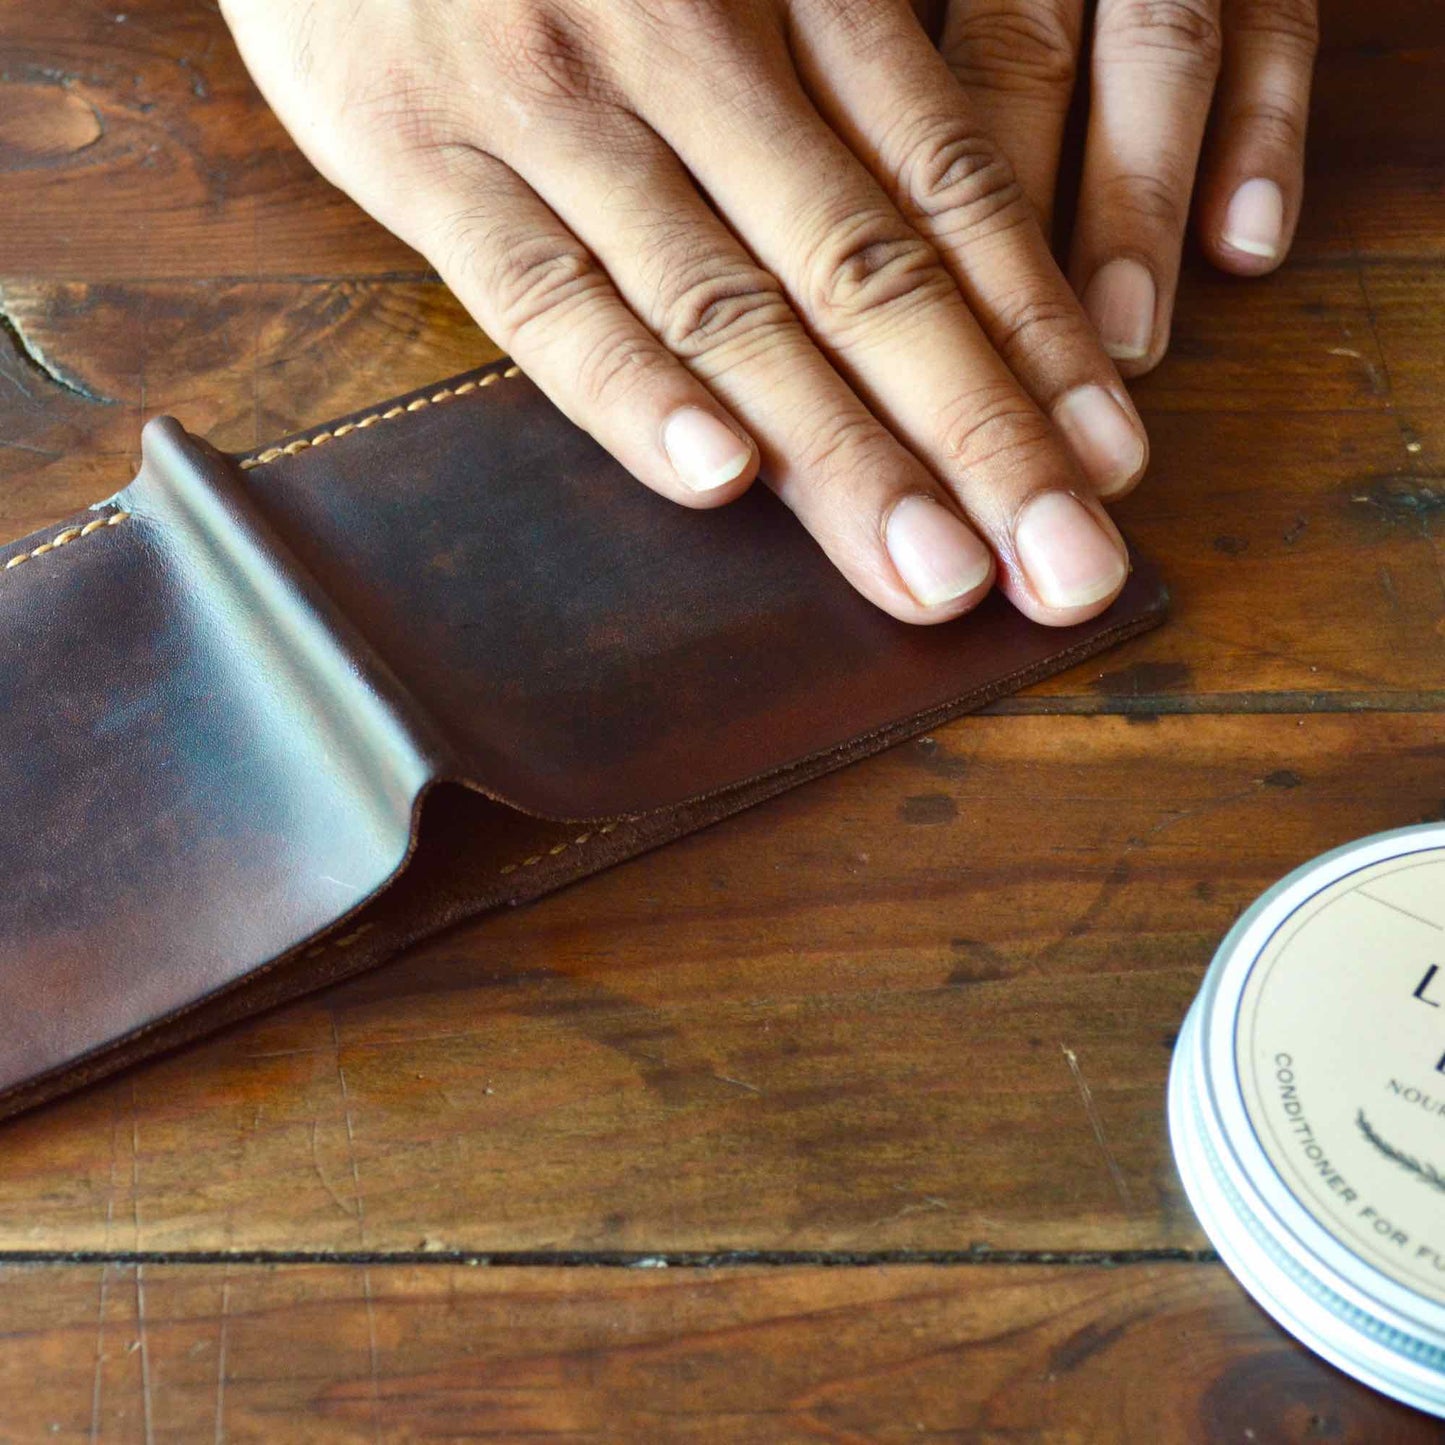 All-Natural Leather Balm